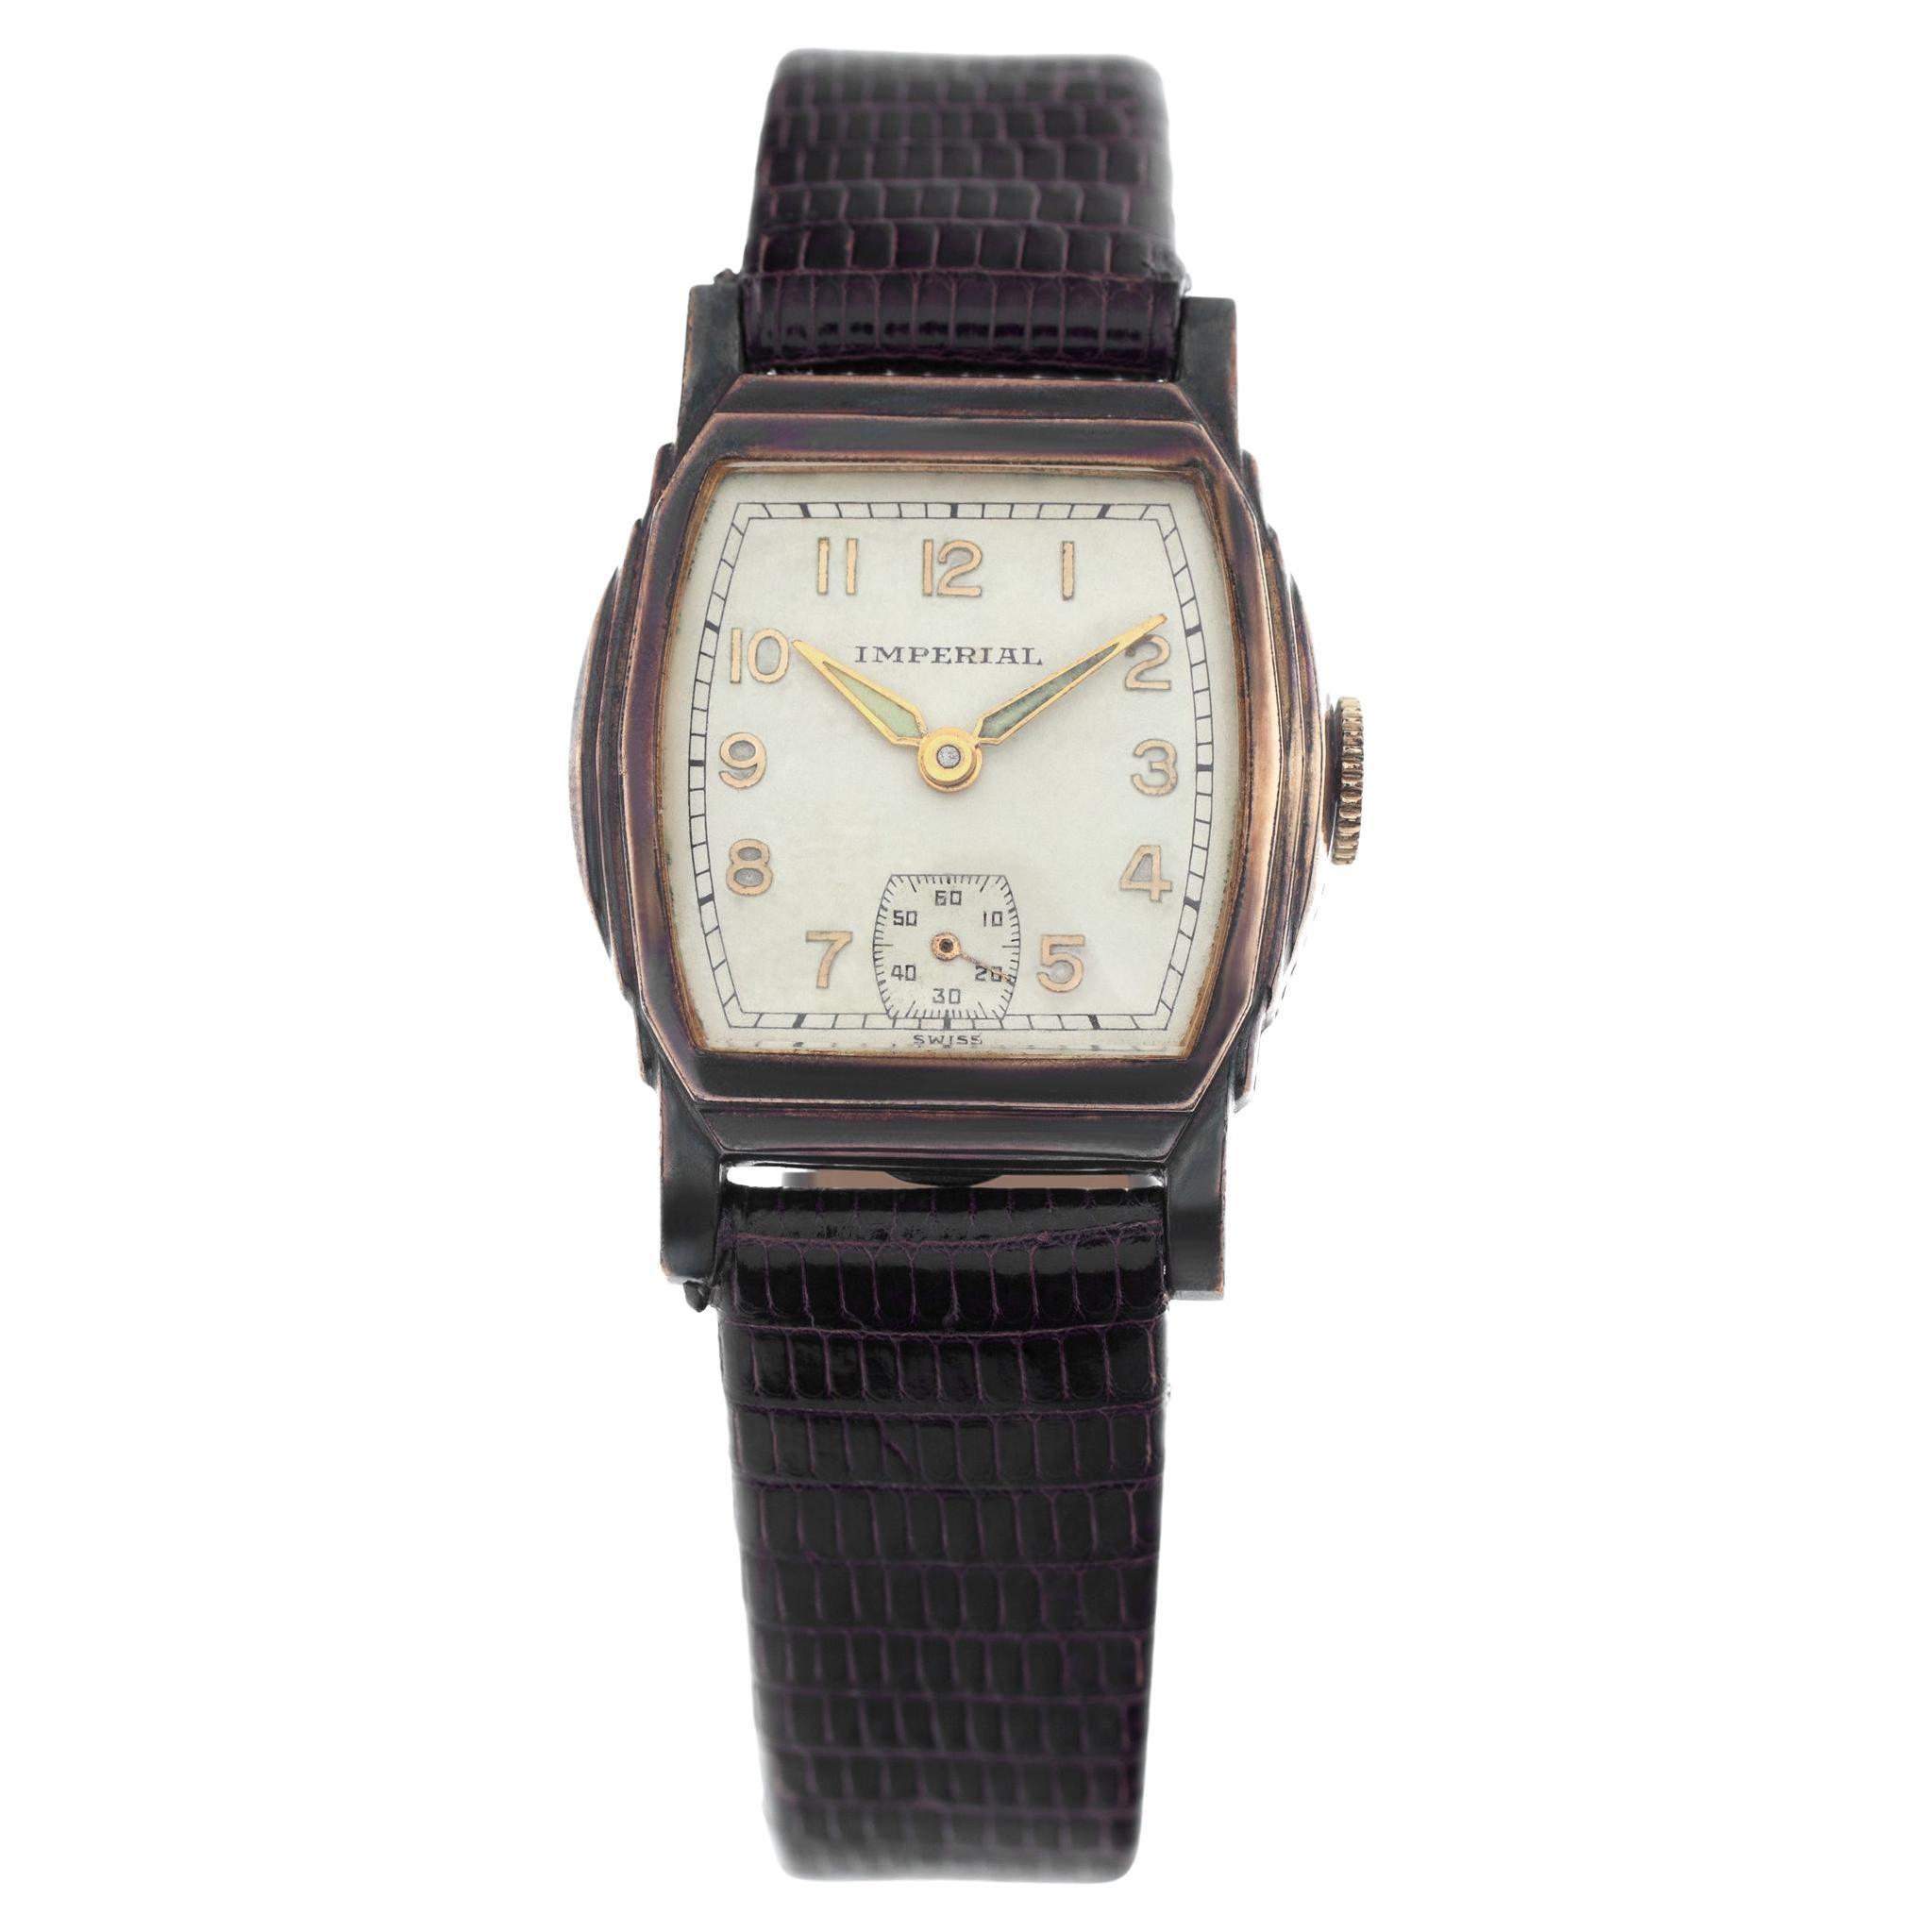 Imperial Classic Manual Wristwatch Reference W4001 For Sale